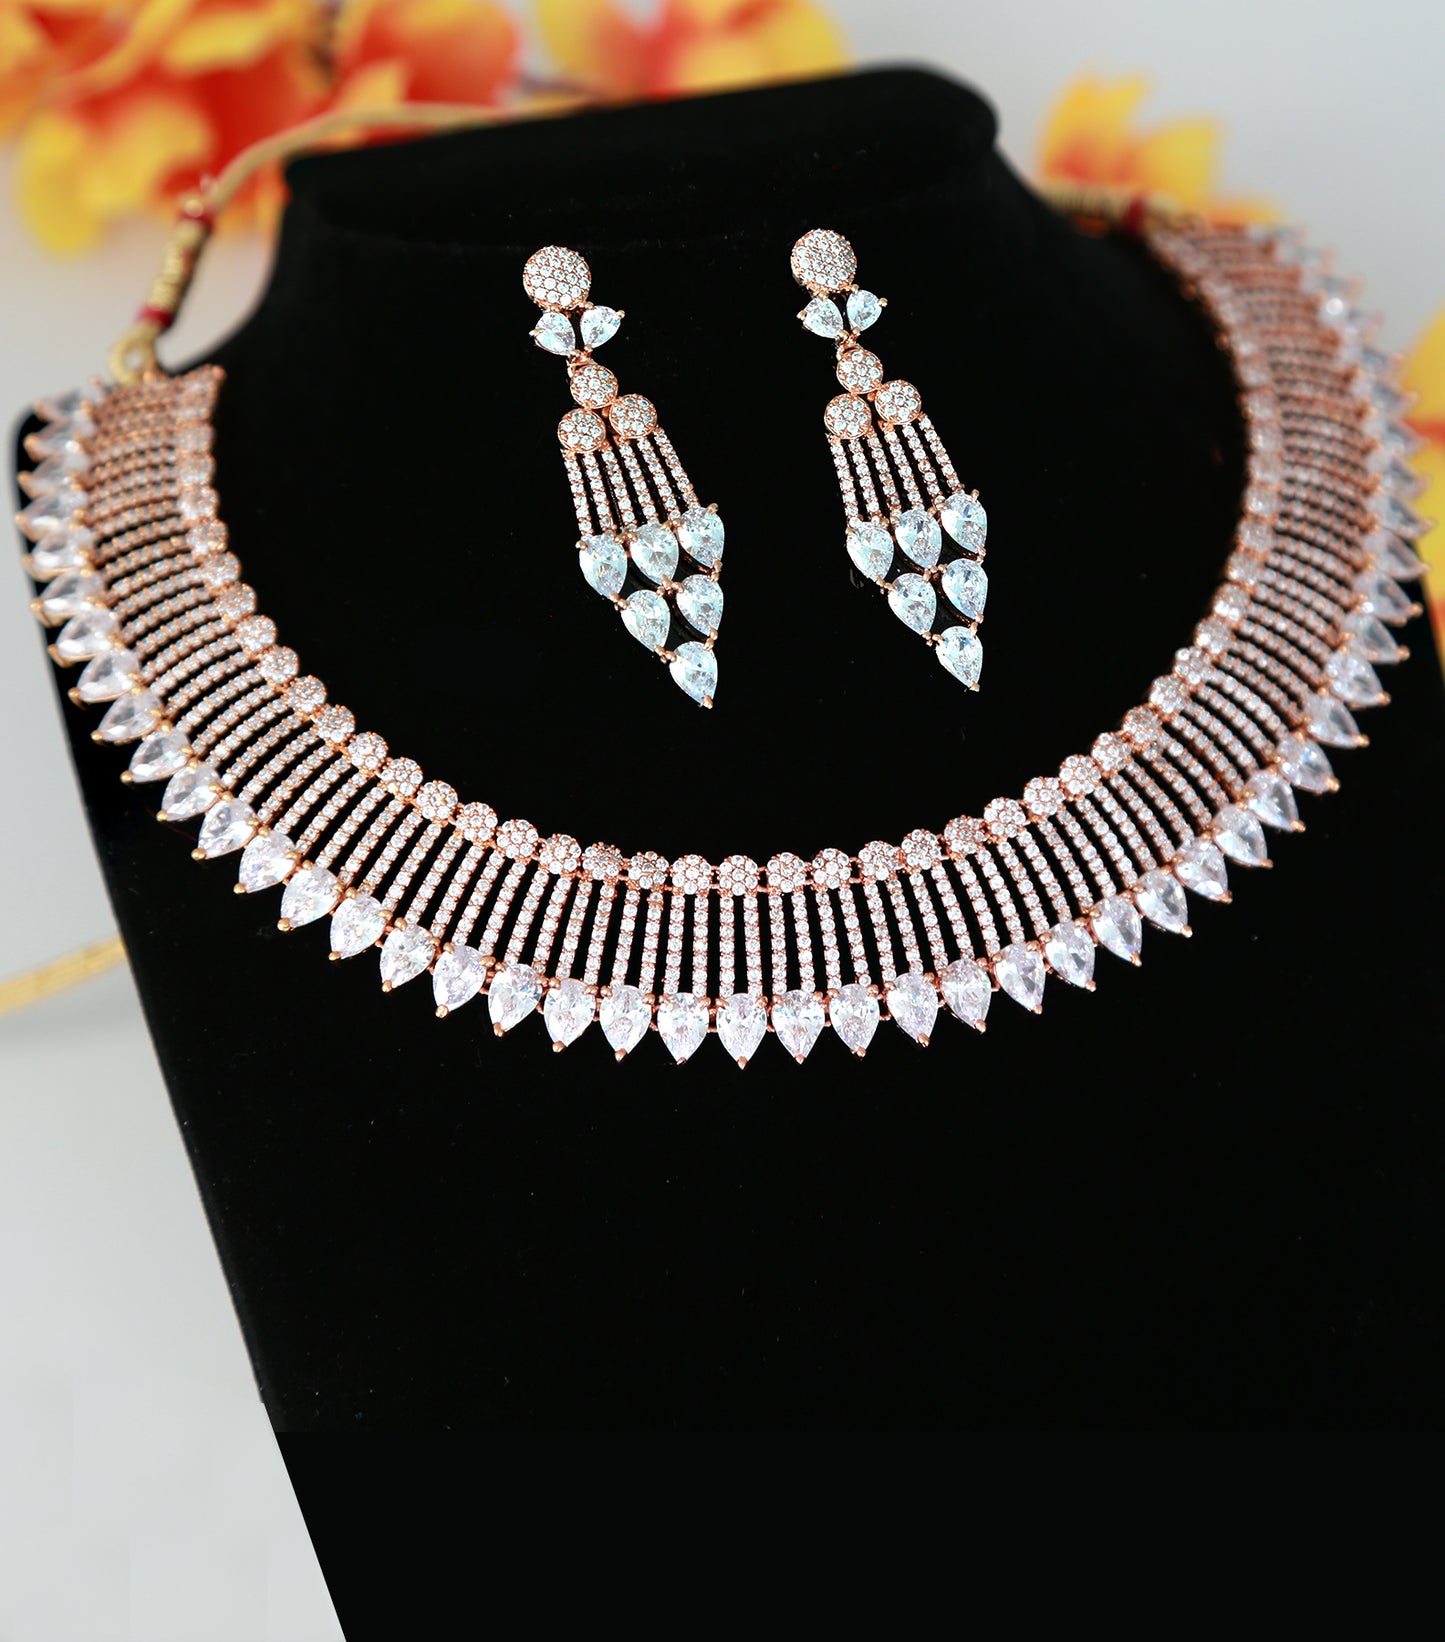 Rose gold American Diamond Necklace earring set